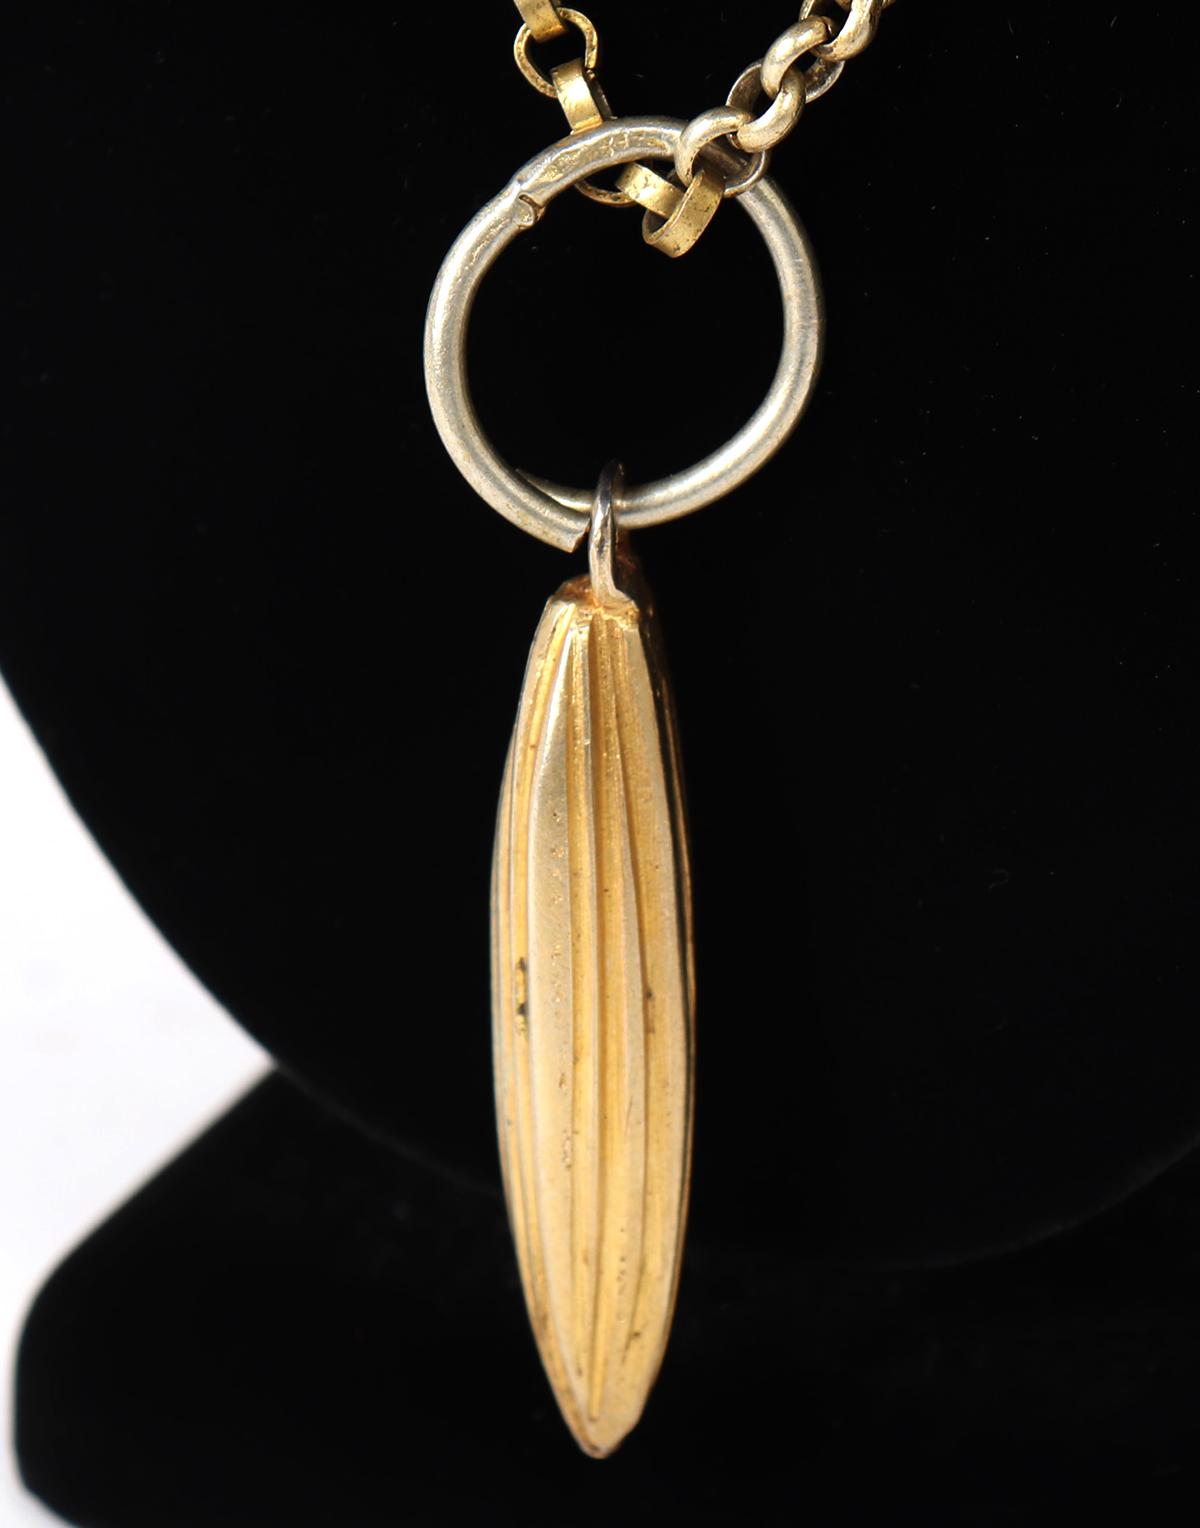 Akan Gold Seed Pendant with Chain